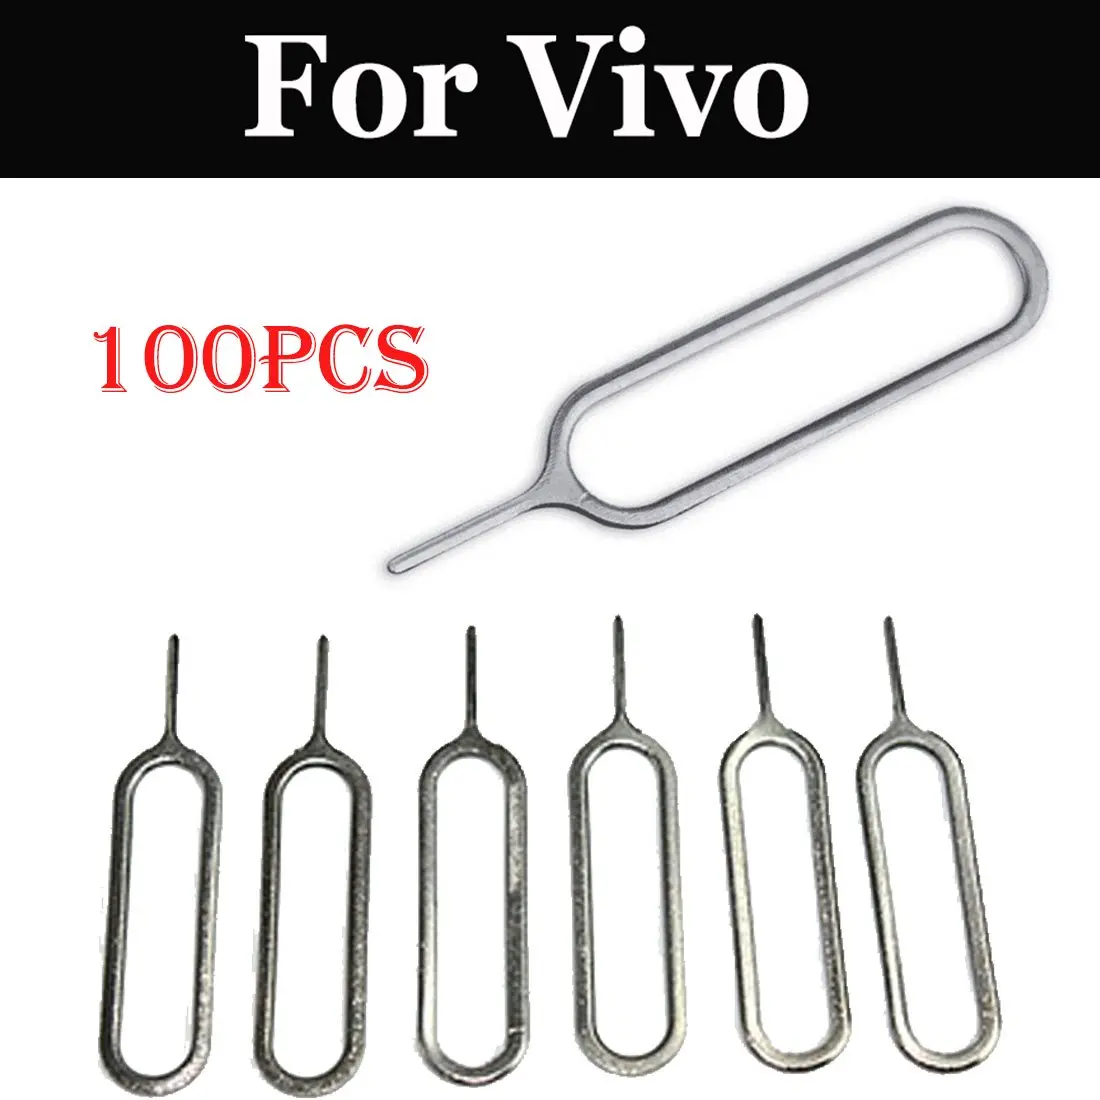 

100pcs Sim Card Tray Removal Eject Pin Tool For Vivo X6S X7 V5 Plus Xplay 5 6 X9 X9 X20 X9s Plus V5 Lite Y66 V7 V9 V11i